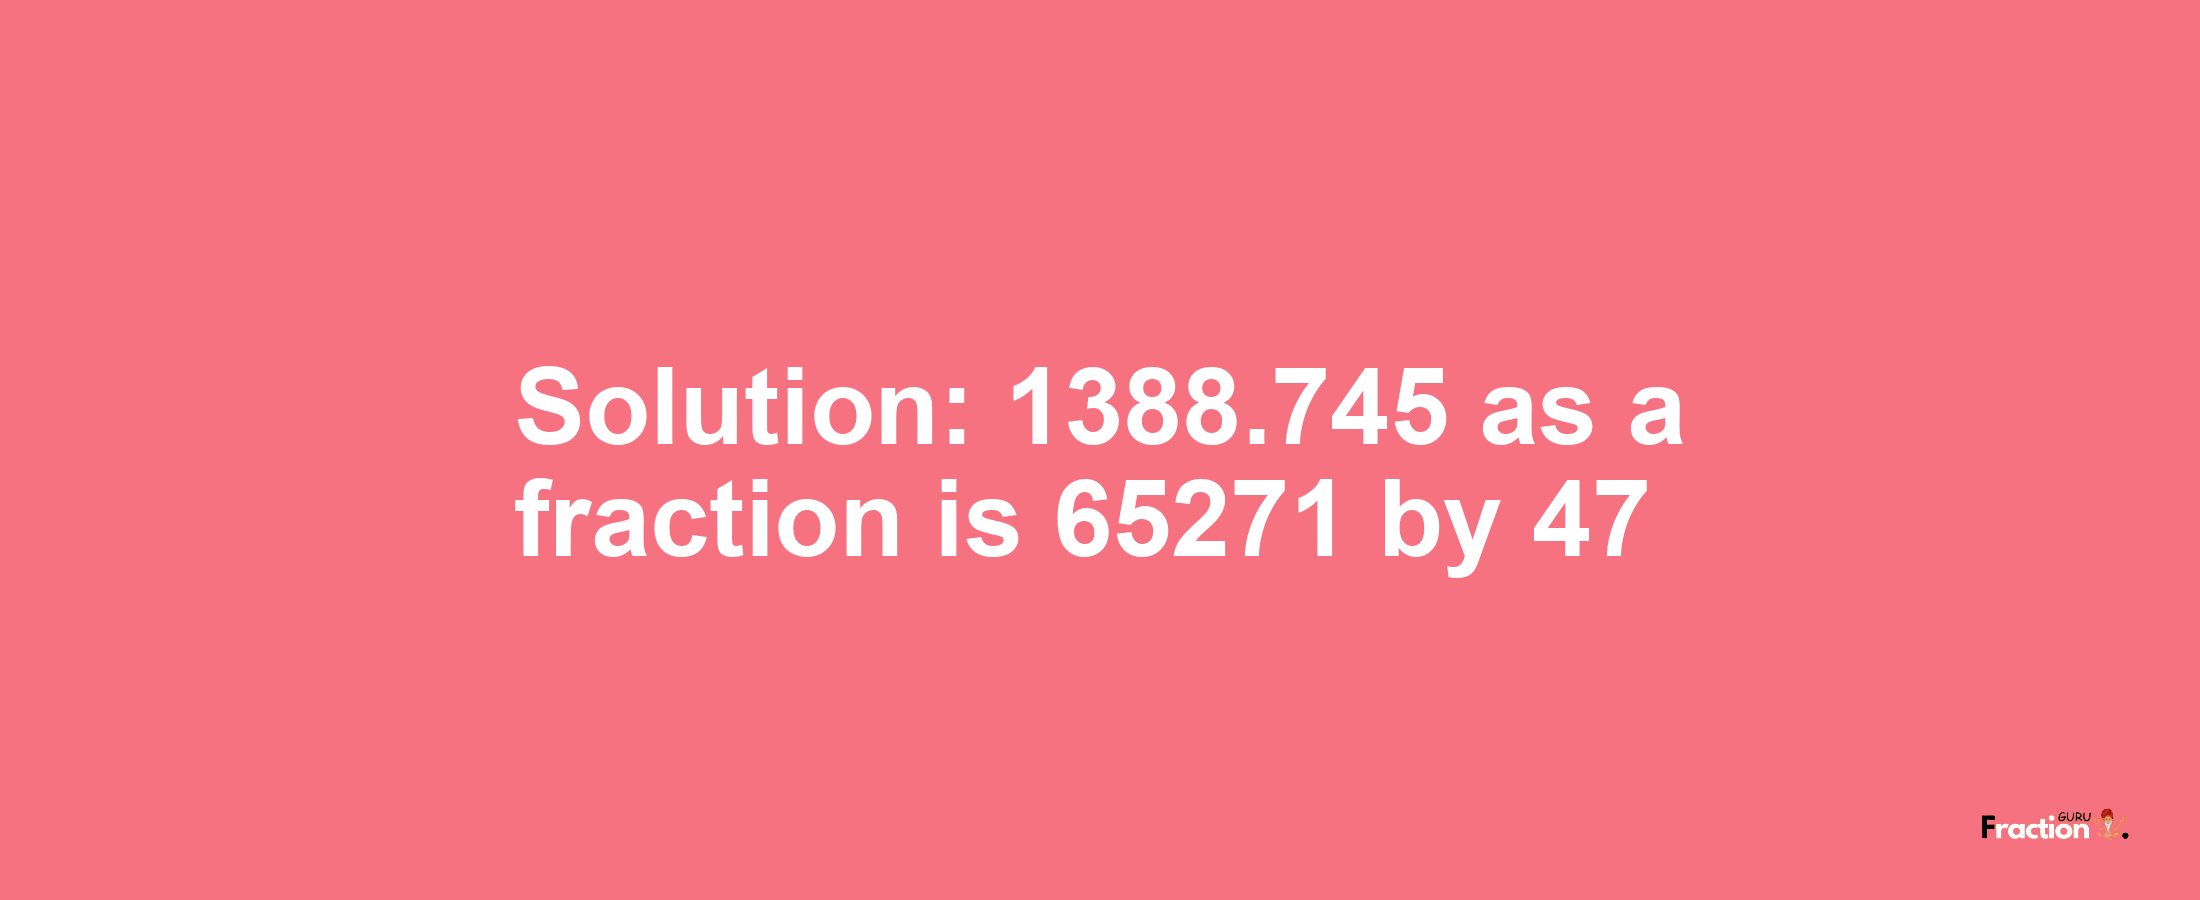 Solution:1388.745 as a fraction is 65271/47